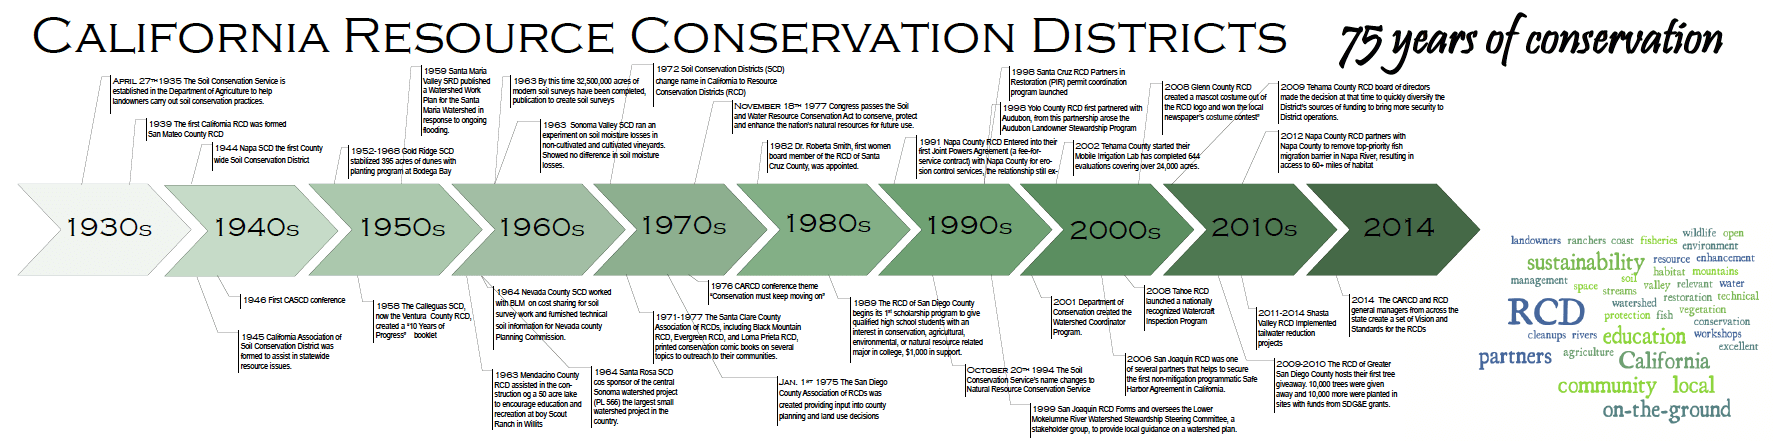 California Source Conservation Districts Timeline